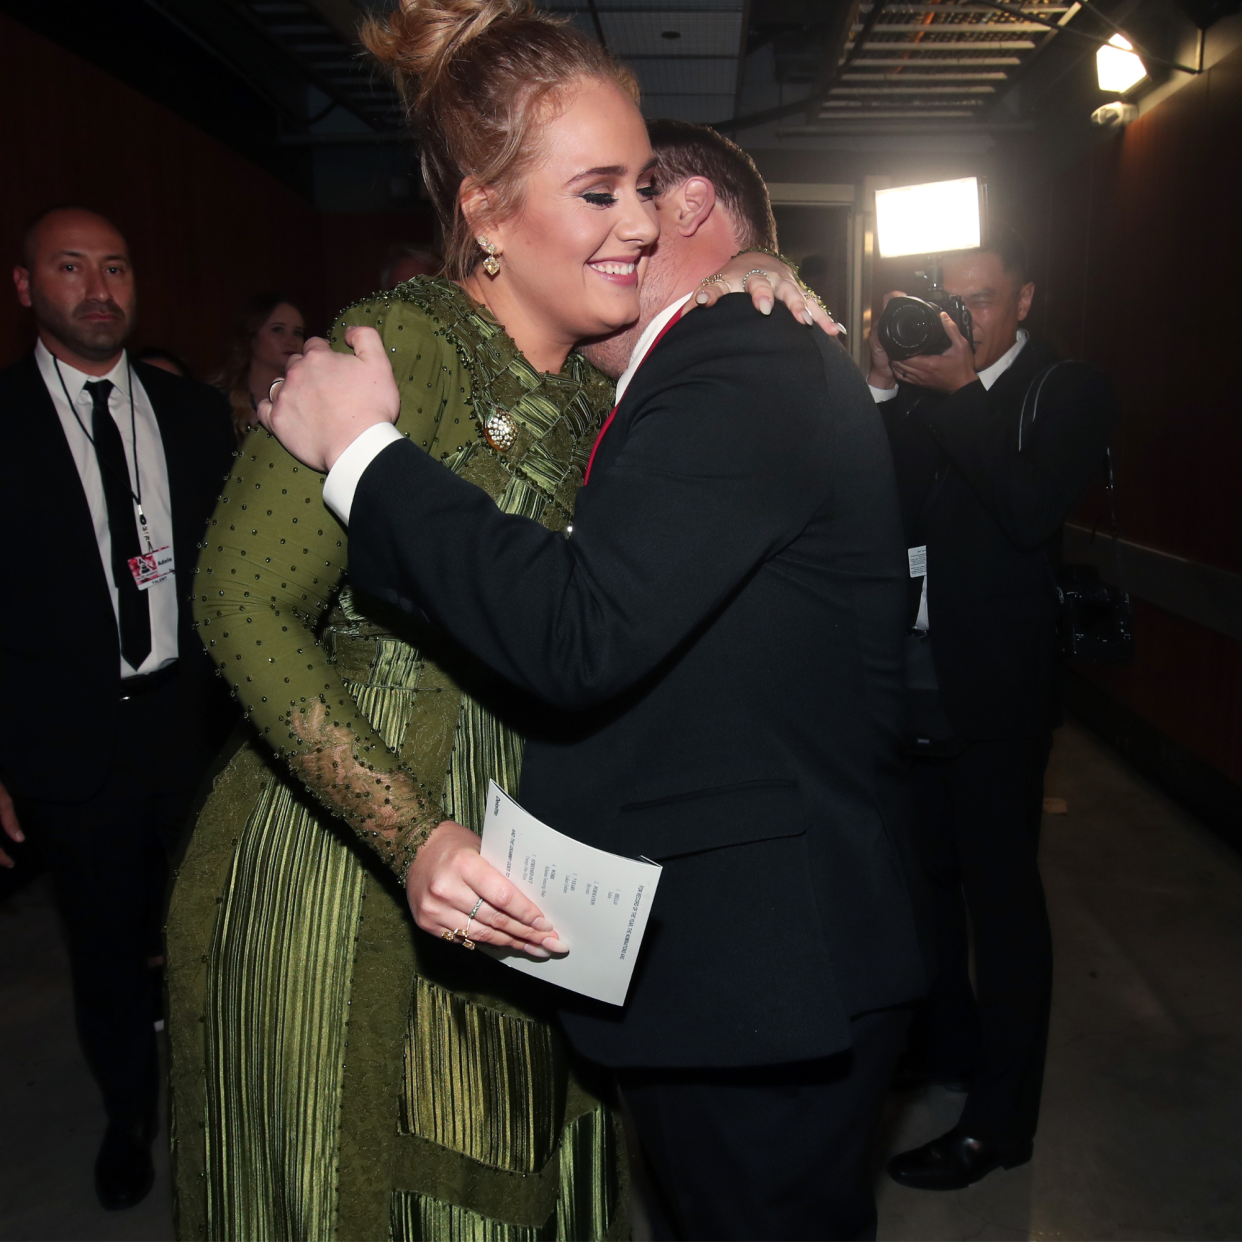  Singer Adele and GRAMMY Awards host James Corden attend The 59th GRAMMY Awards at STAPLES Center on February 12, 2017 in Los Angeles, California 